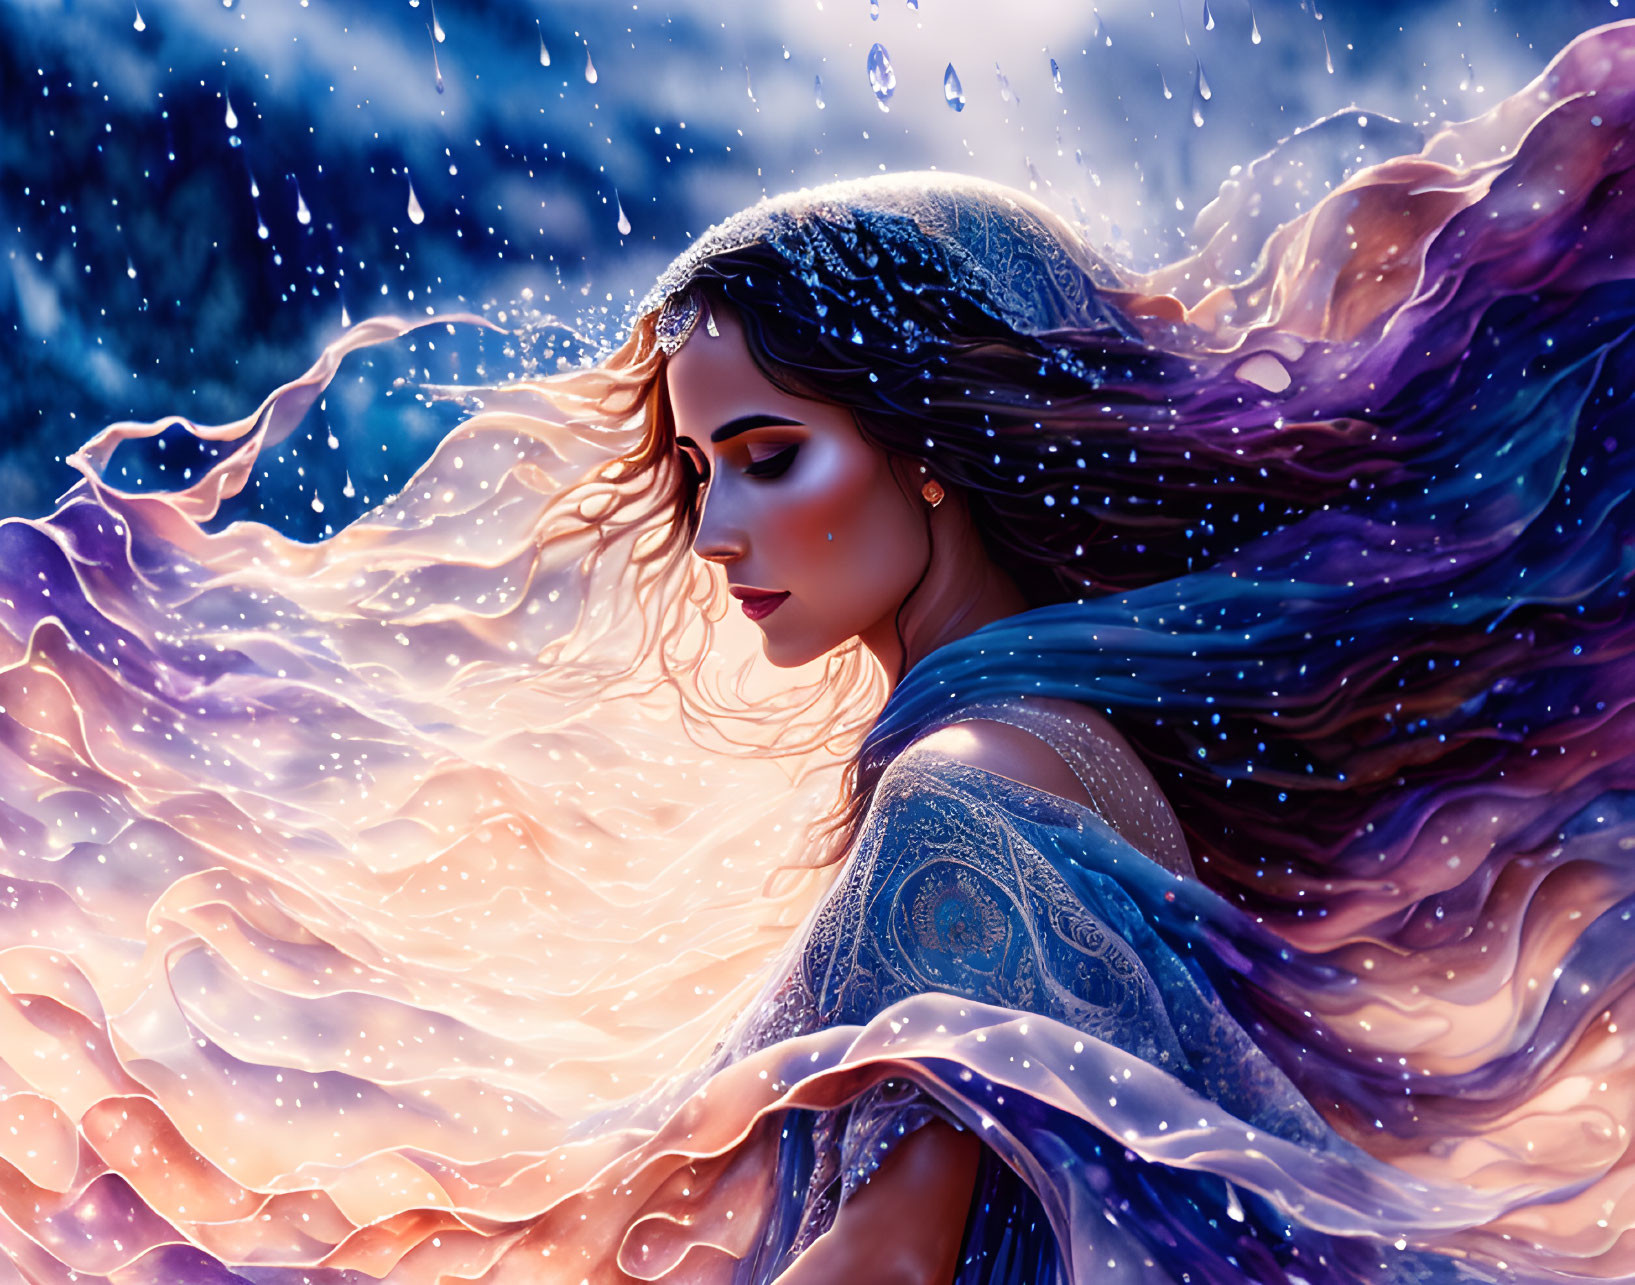 Woman with flowing hair in vibrant dress against surreal snowy backdrop